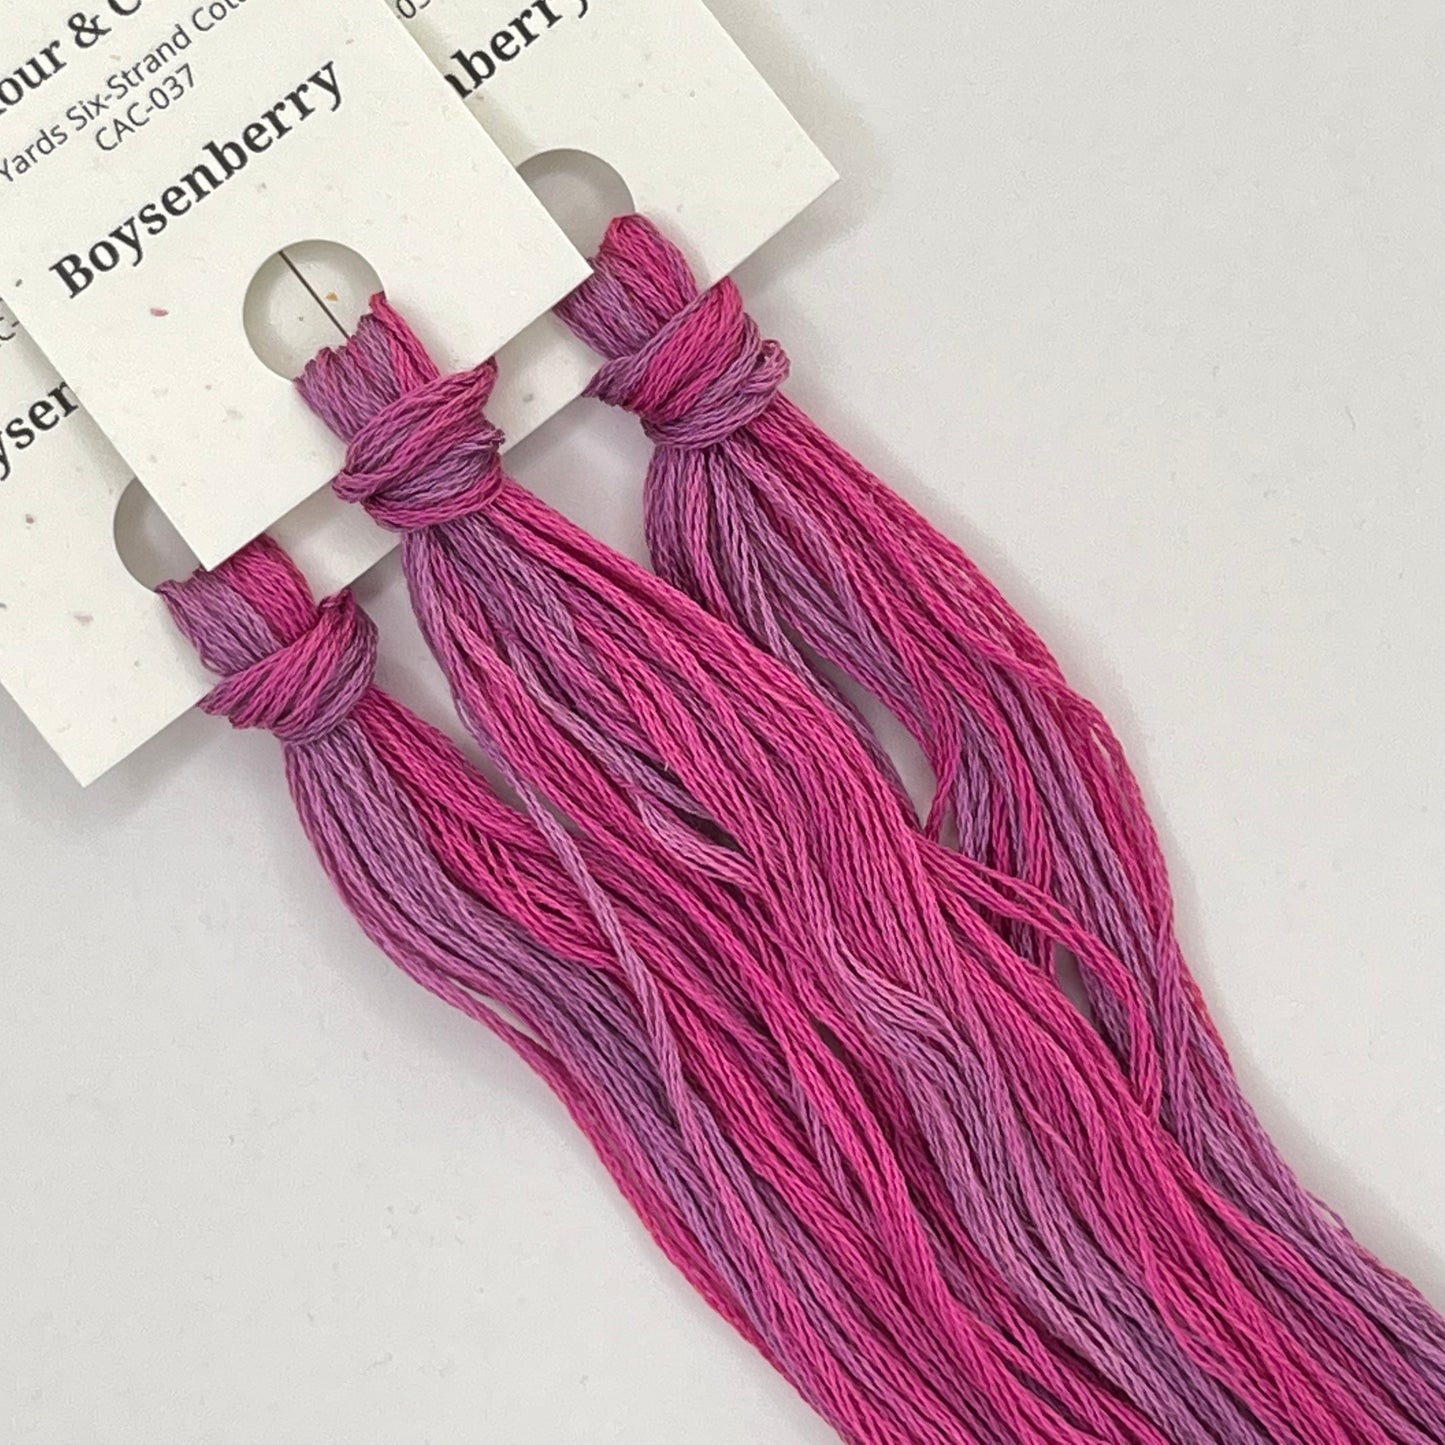 Colour and Cotton Hand Dyed Thread - Boysenberry